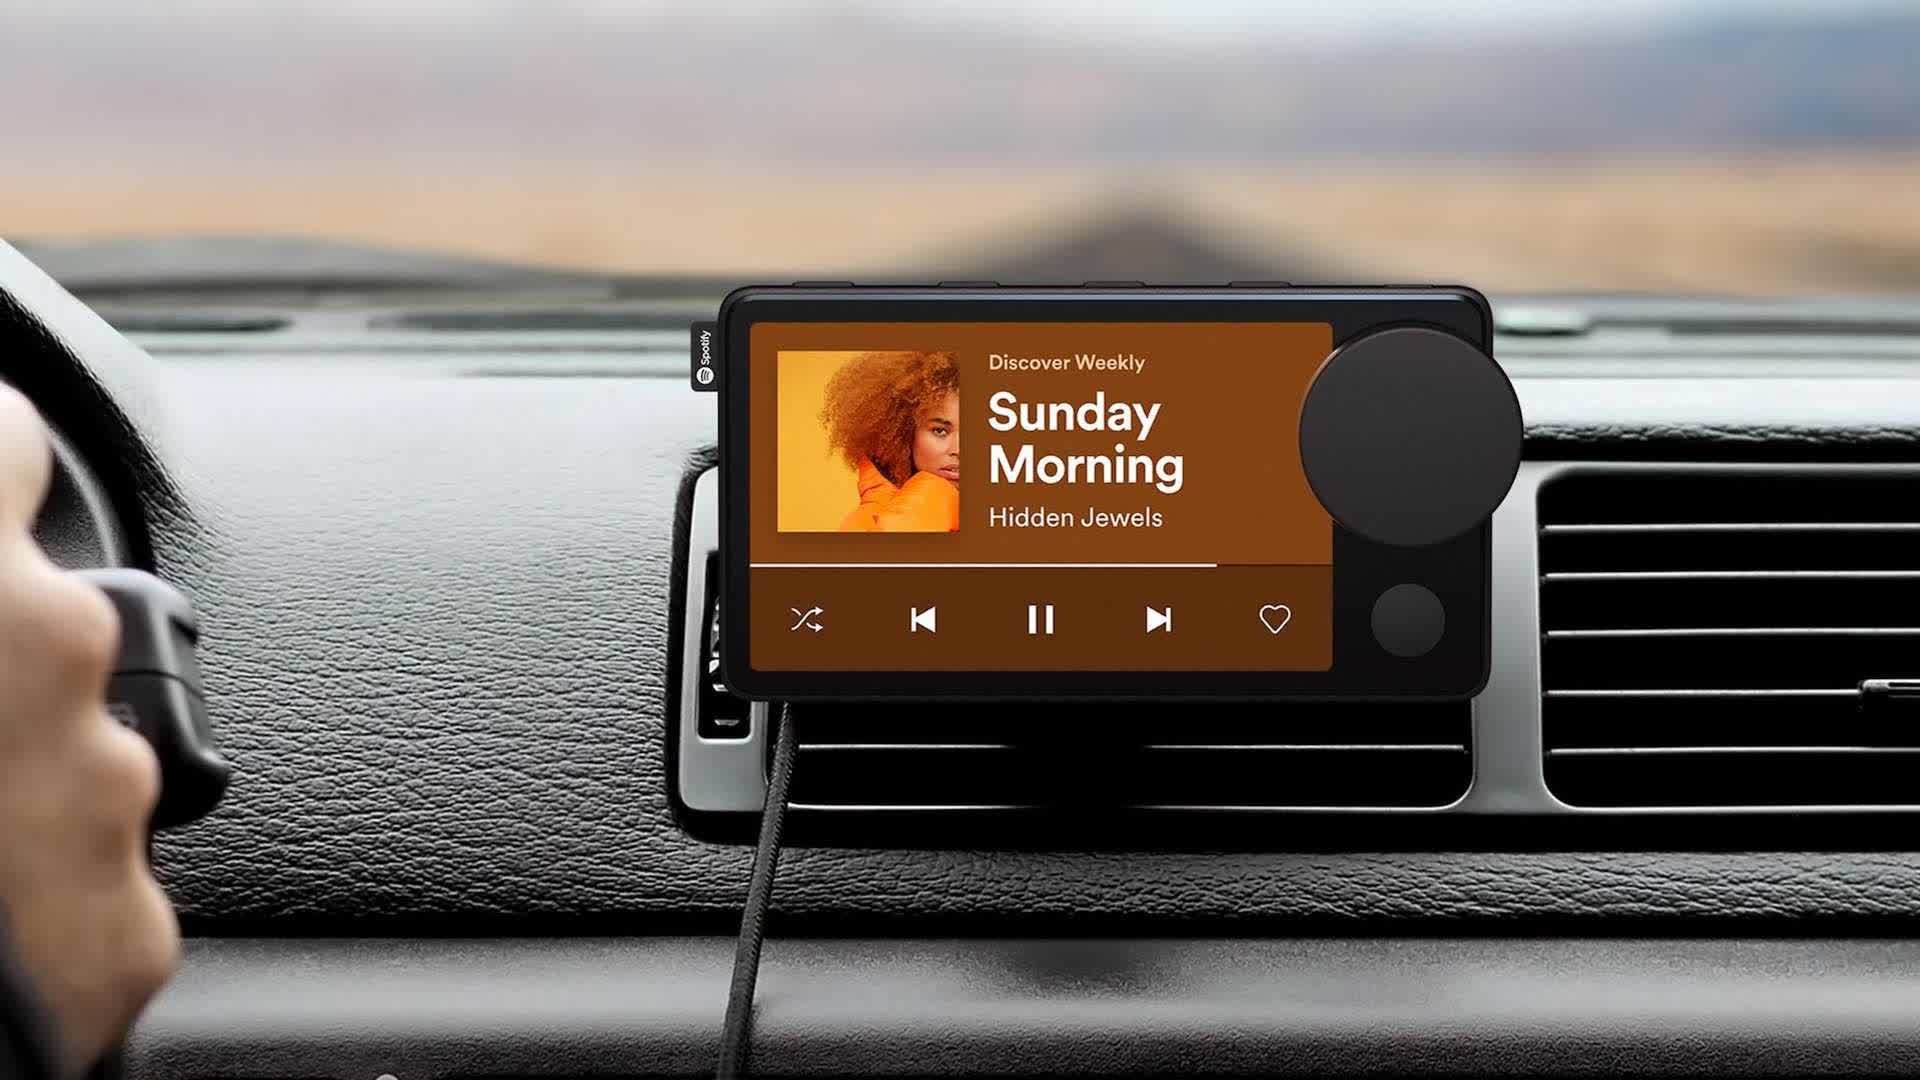 Spotify quietly discontinues Car Thing dashboard accessory